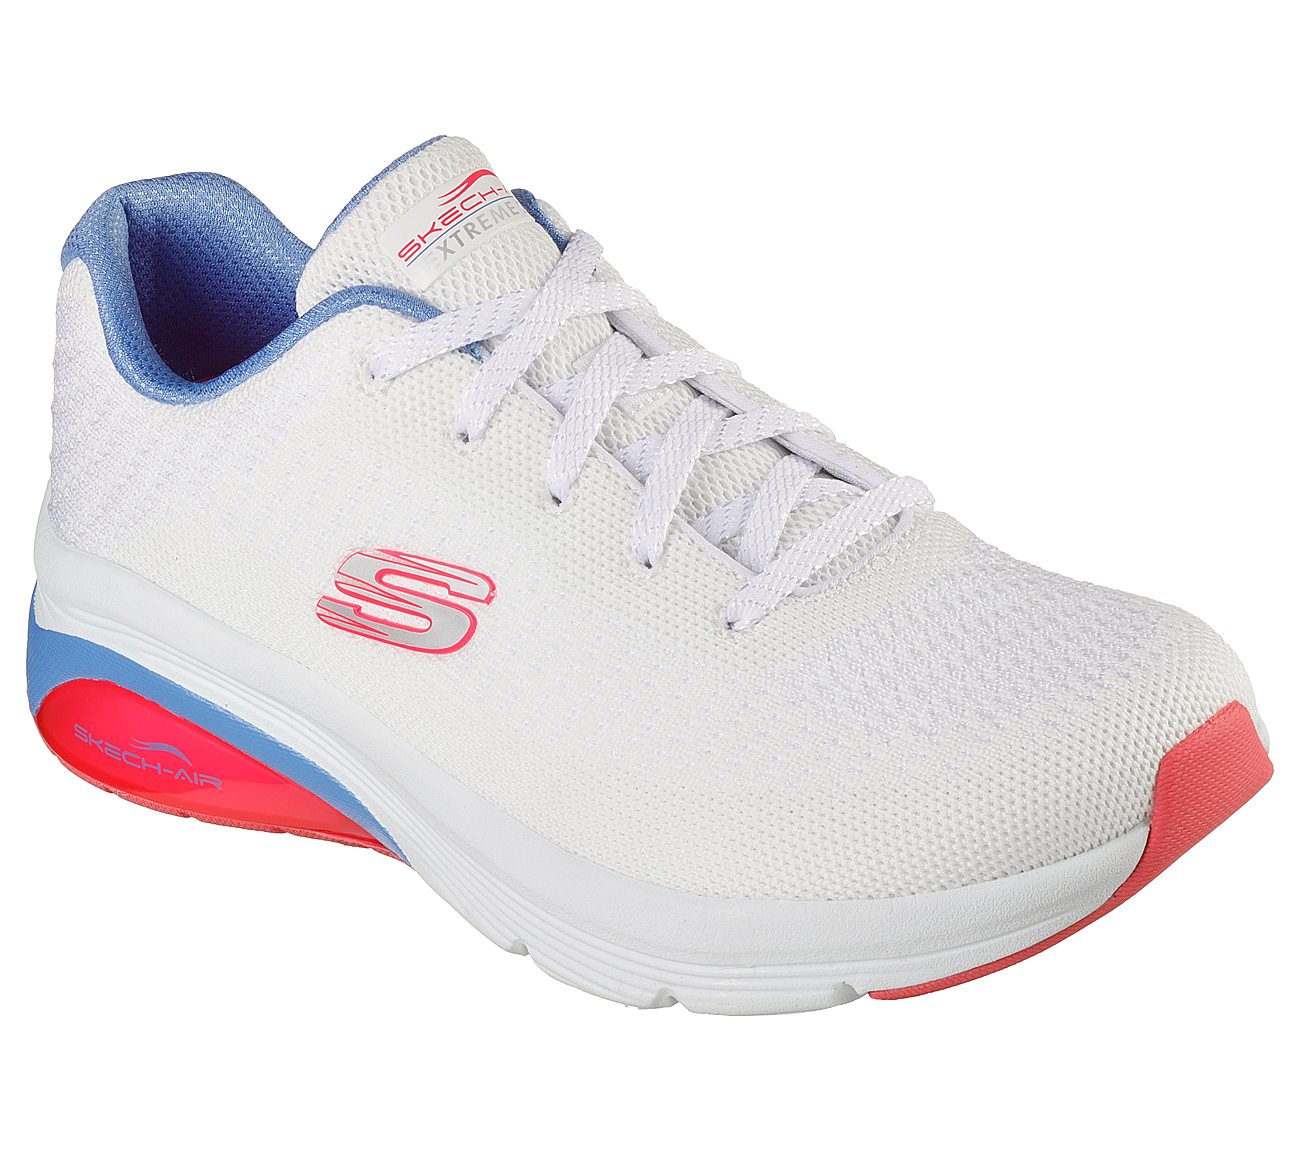 SKECH-AIR EXTREME 2.0-CLASSIC, WHITE BLACK PINK Footwear Lateral View